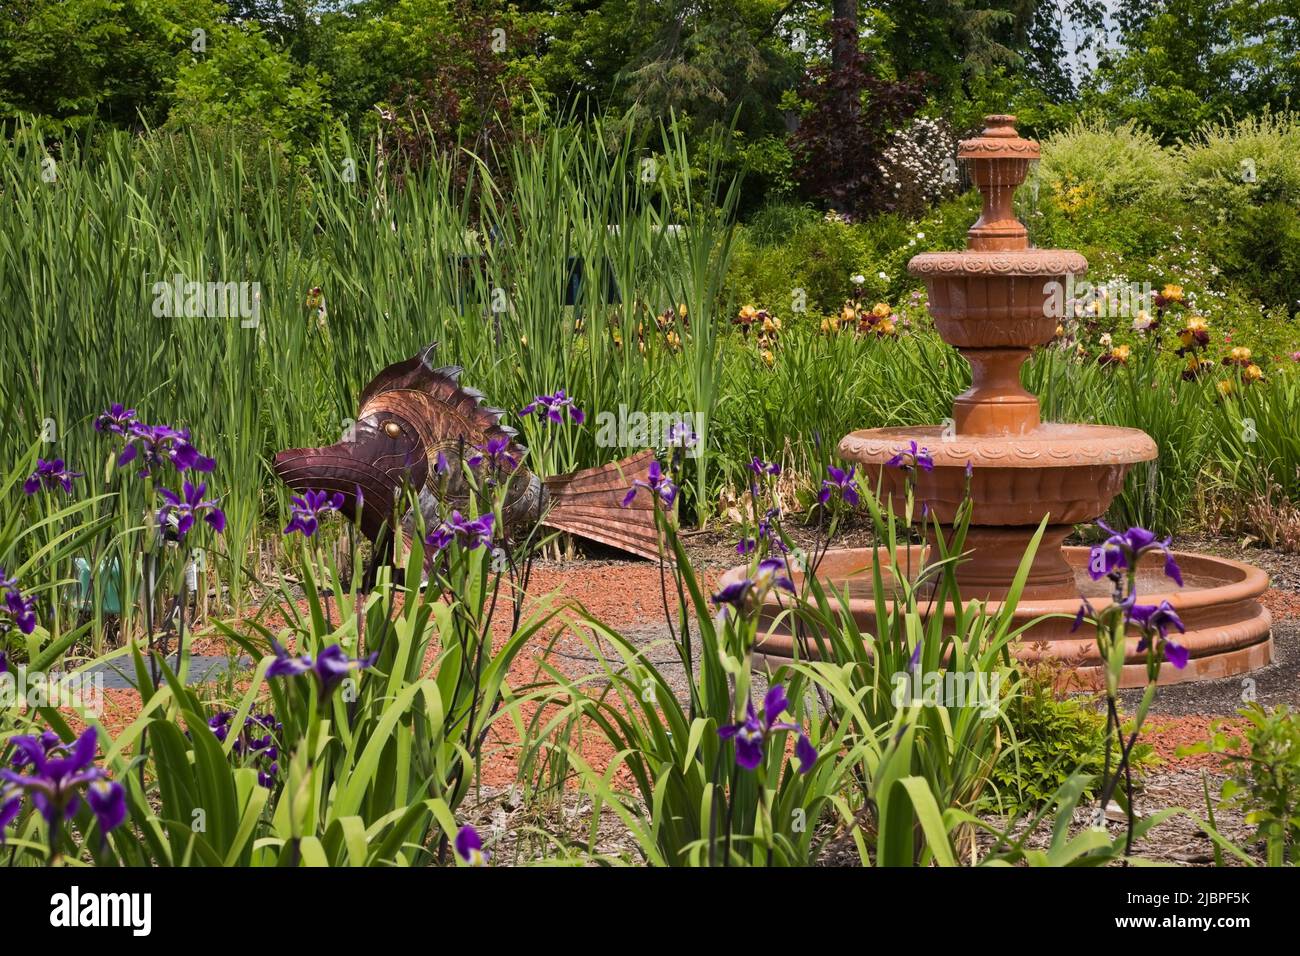 Cascading terracotta water fountain at the Route des Gerbes d'Angelica garden in spring, Mirabel, Quebec, Laurentians, Canada. Stock Photo